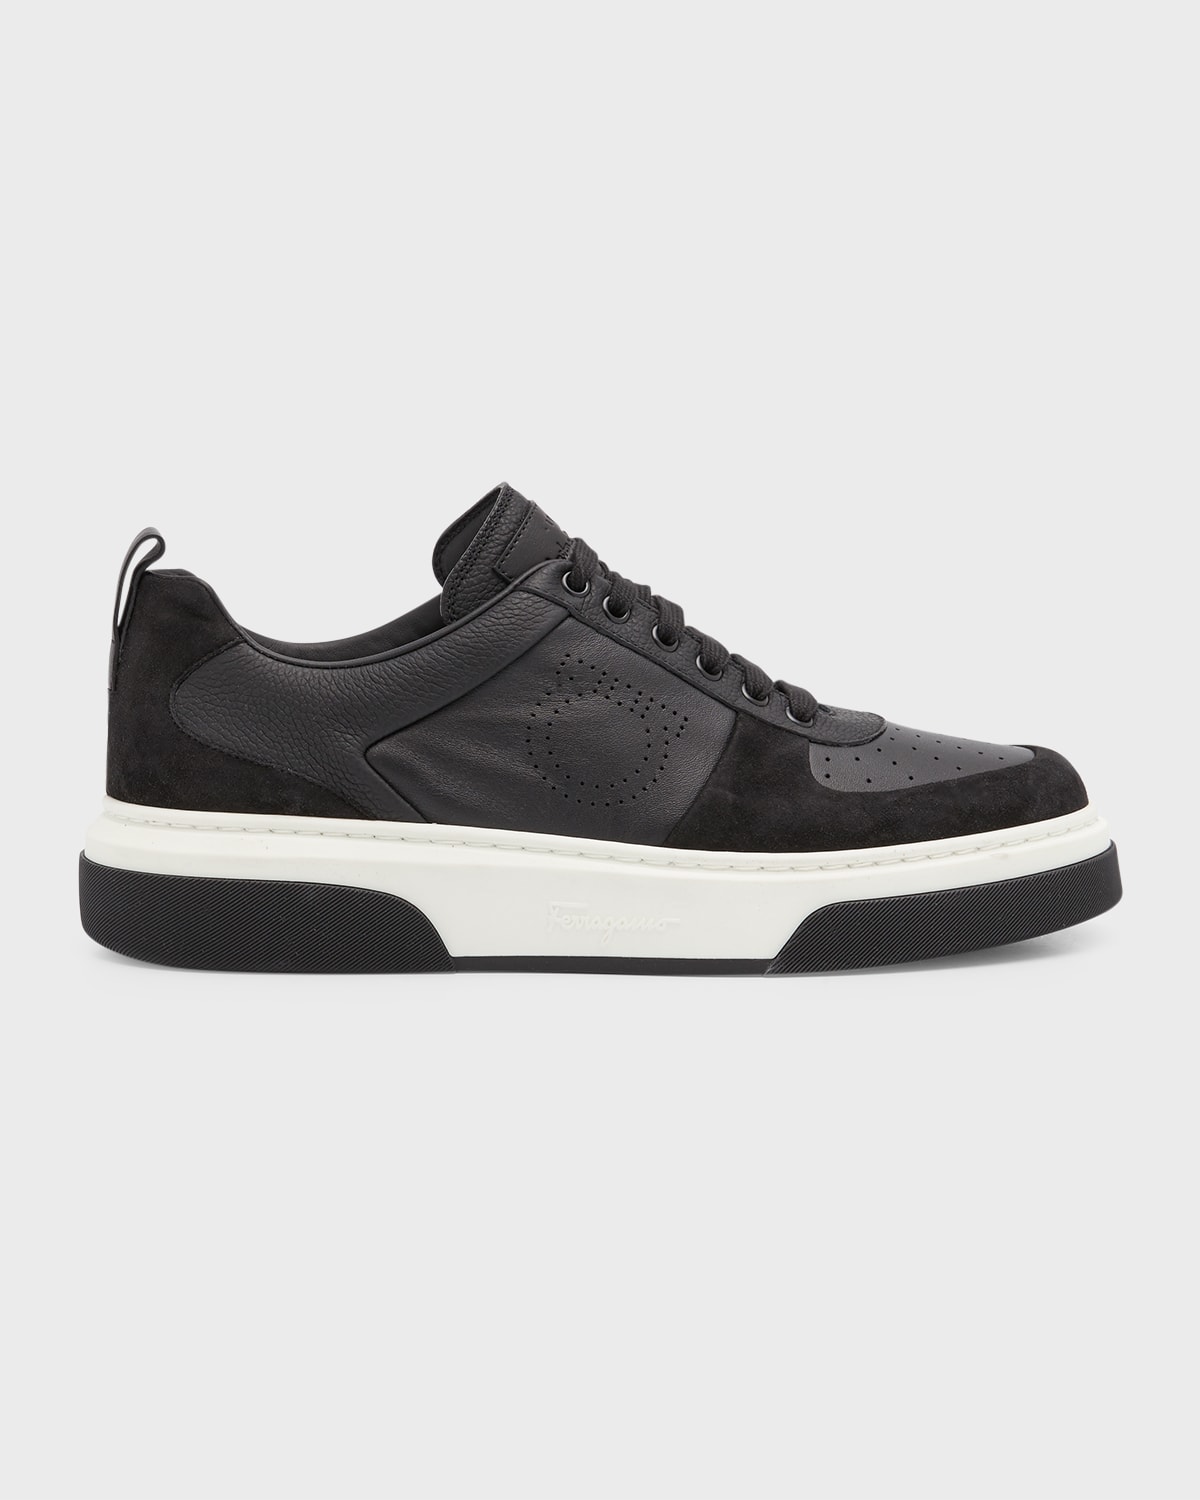 Men's Cassina Perforated Leather Low-Top Sneakers